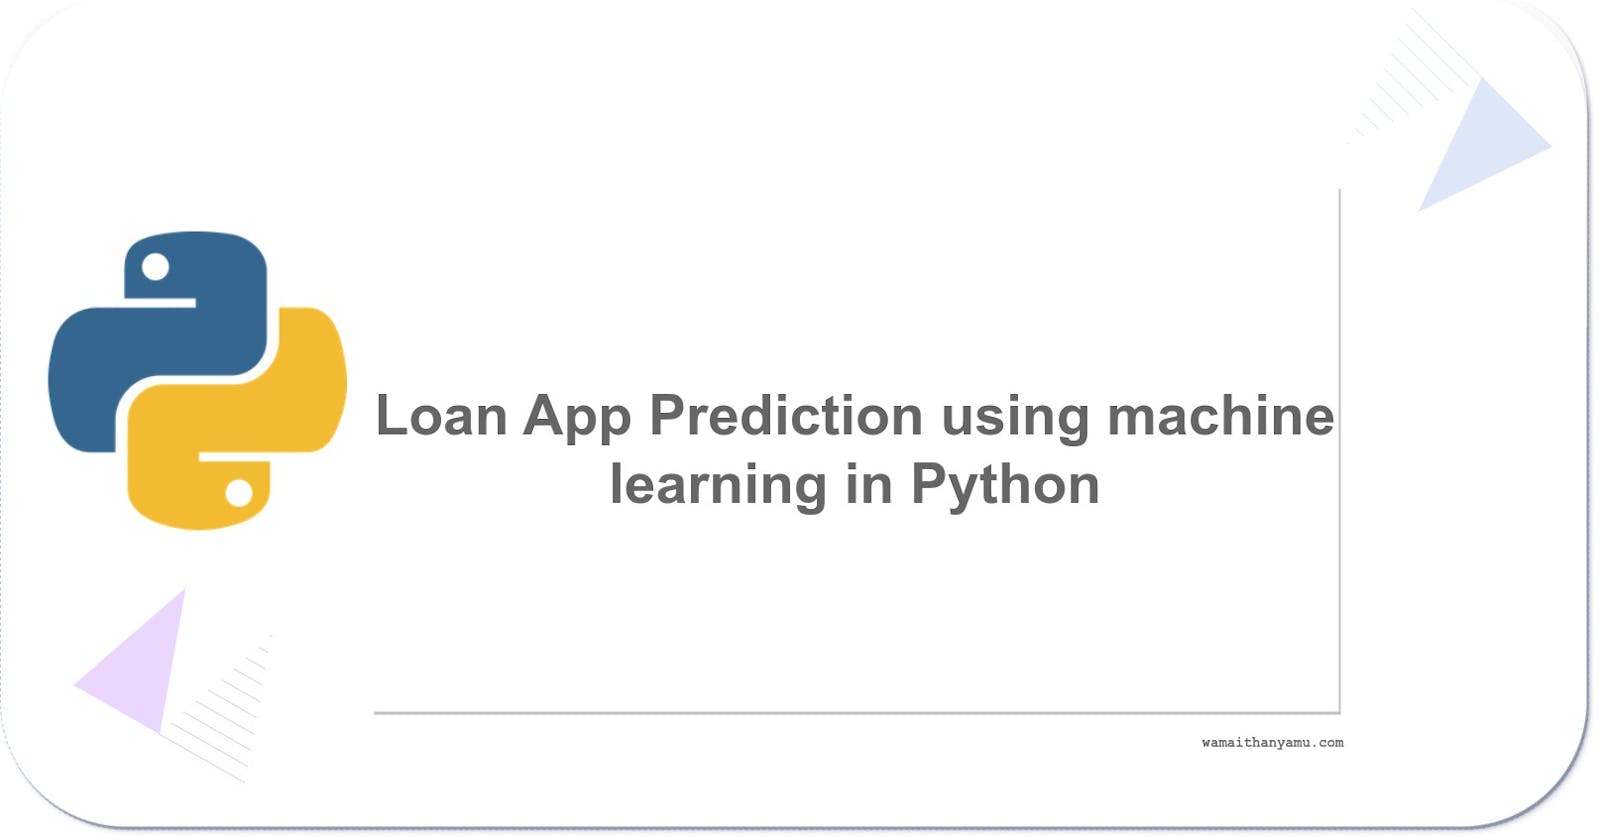 Loan App Prediction using machine learning in Python